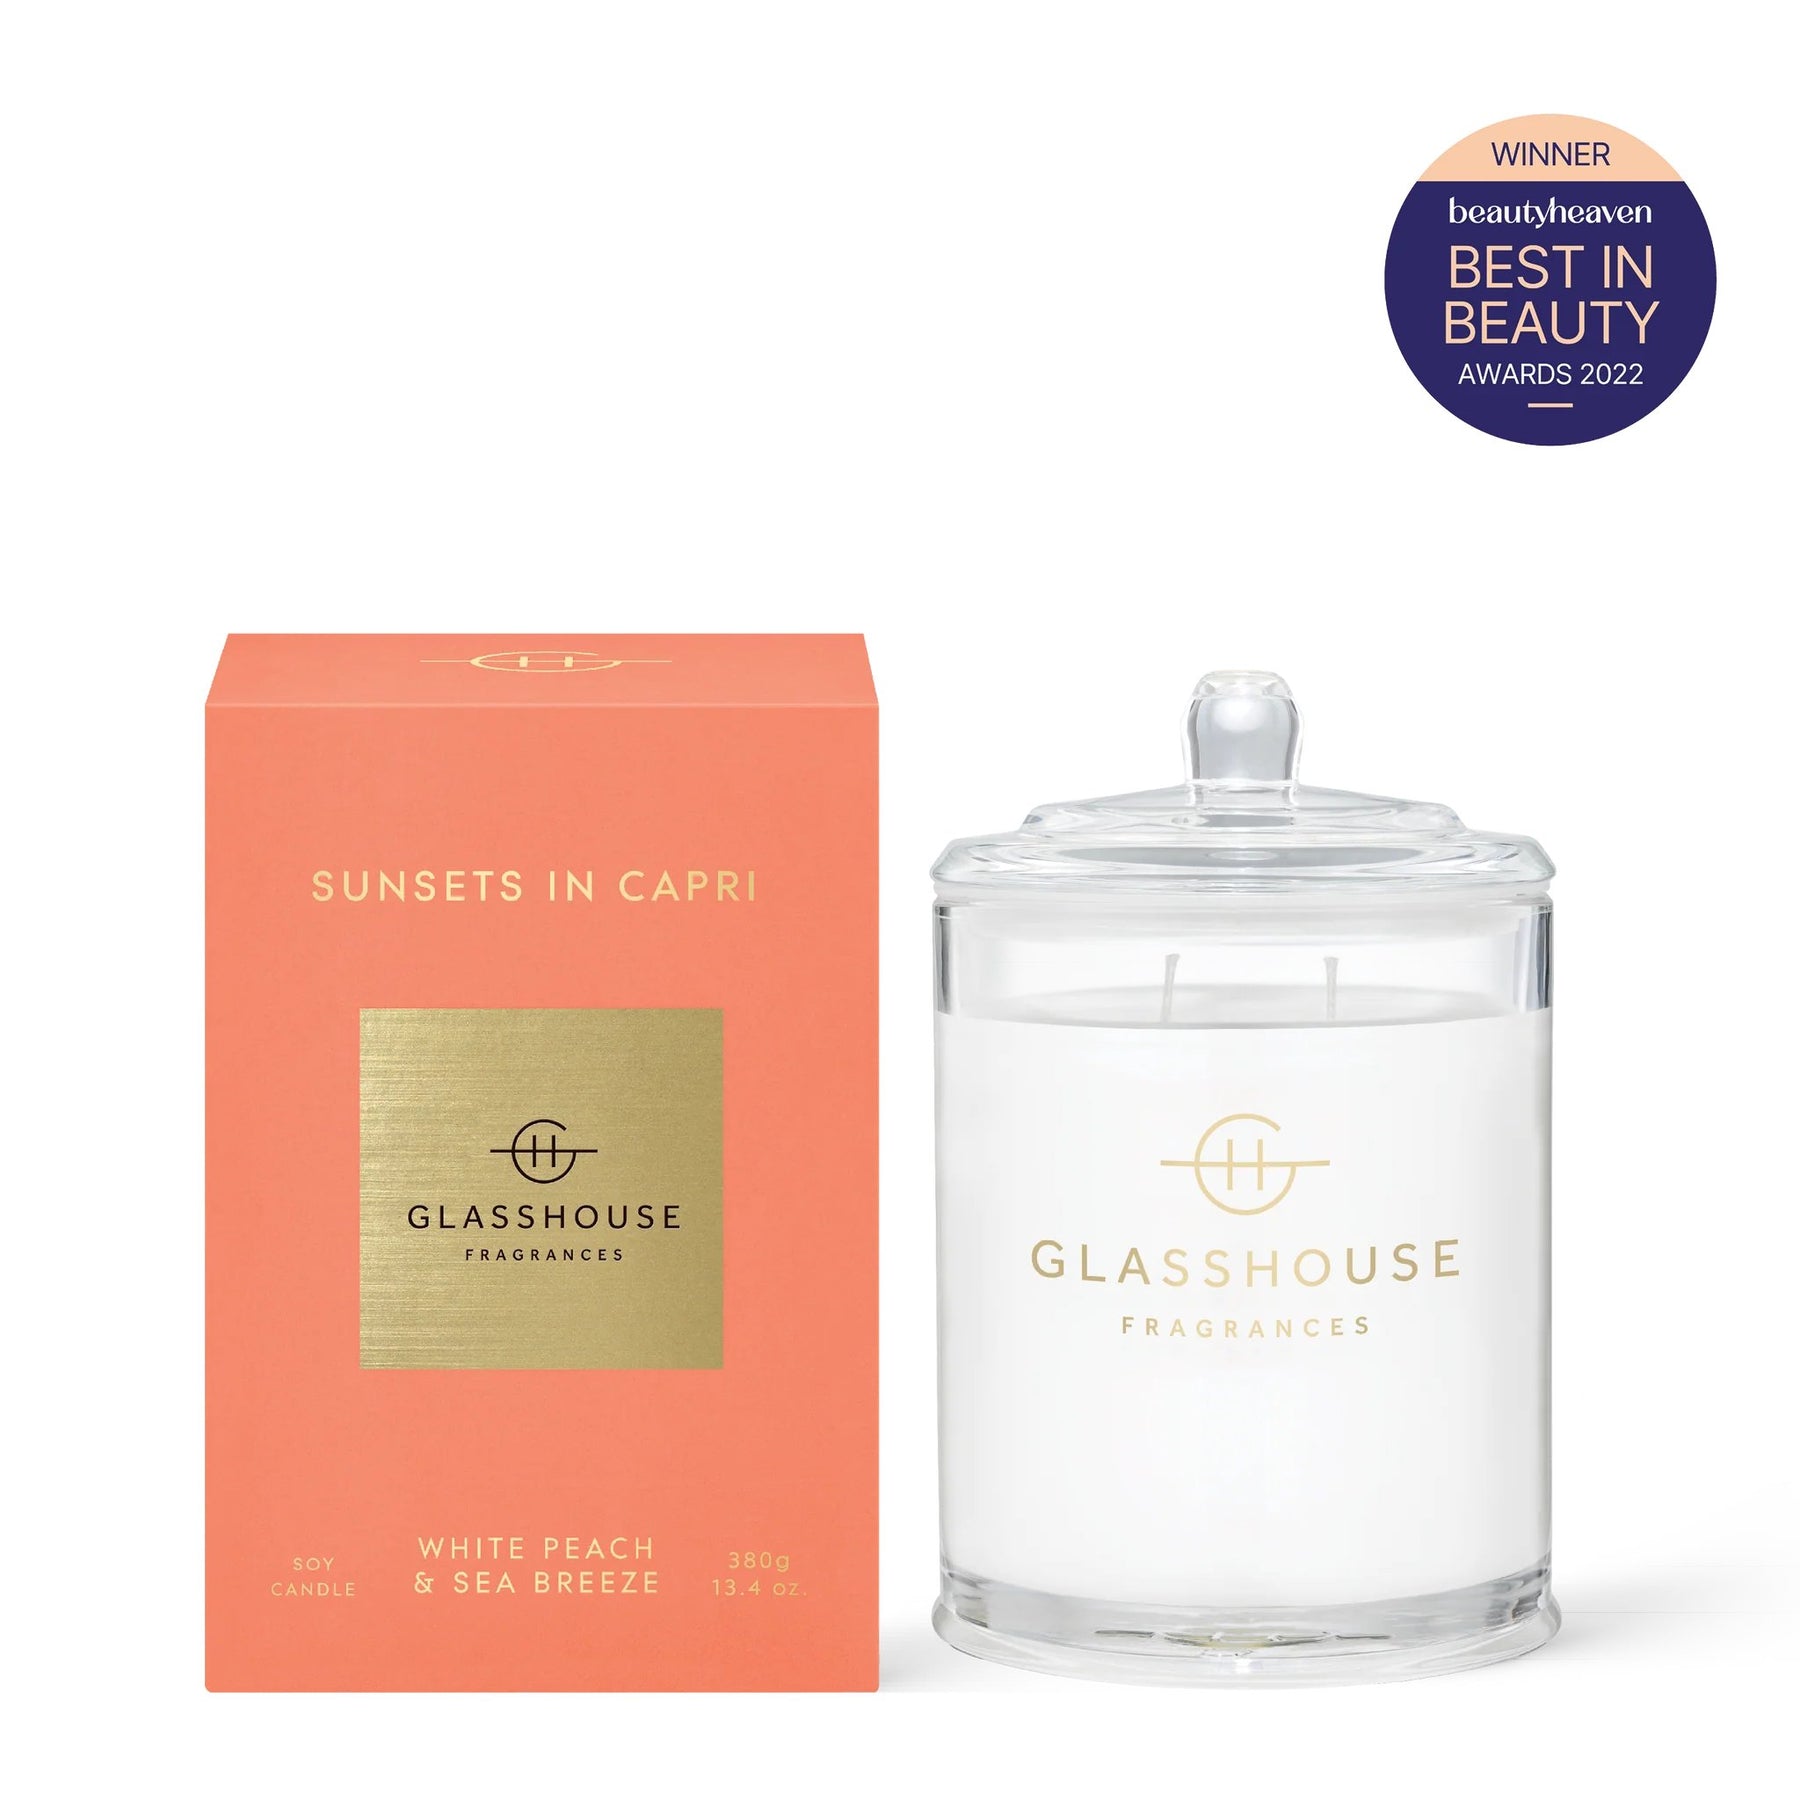 Glasshouse Sunsets in Capri 13.4 oz. Candle